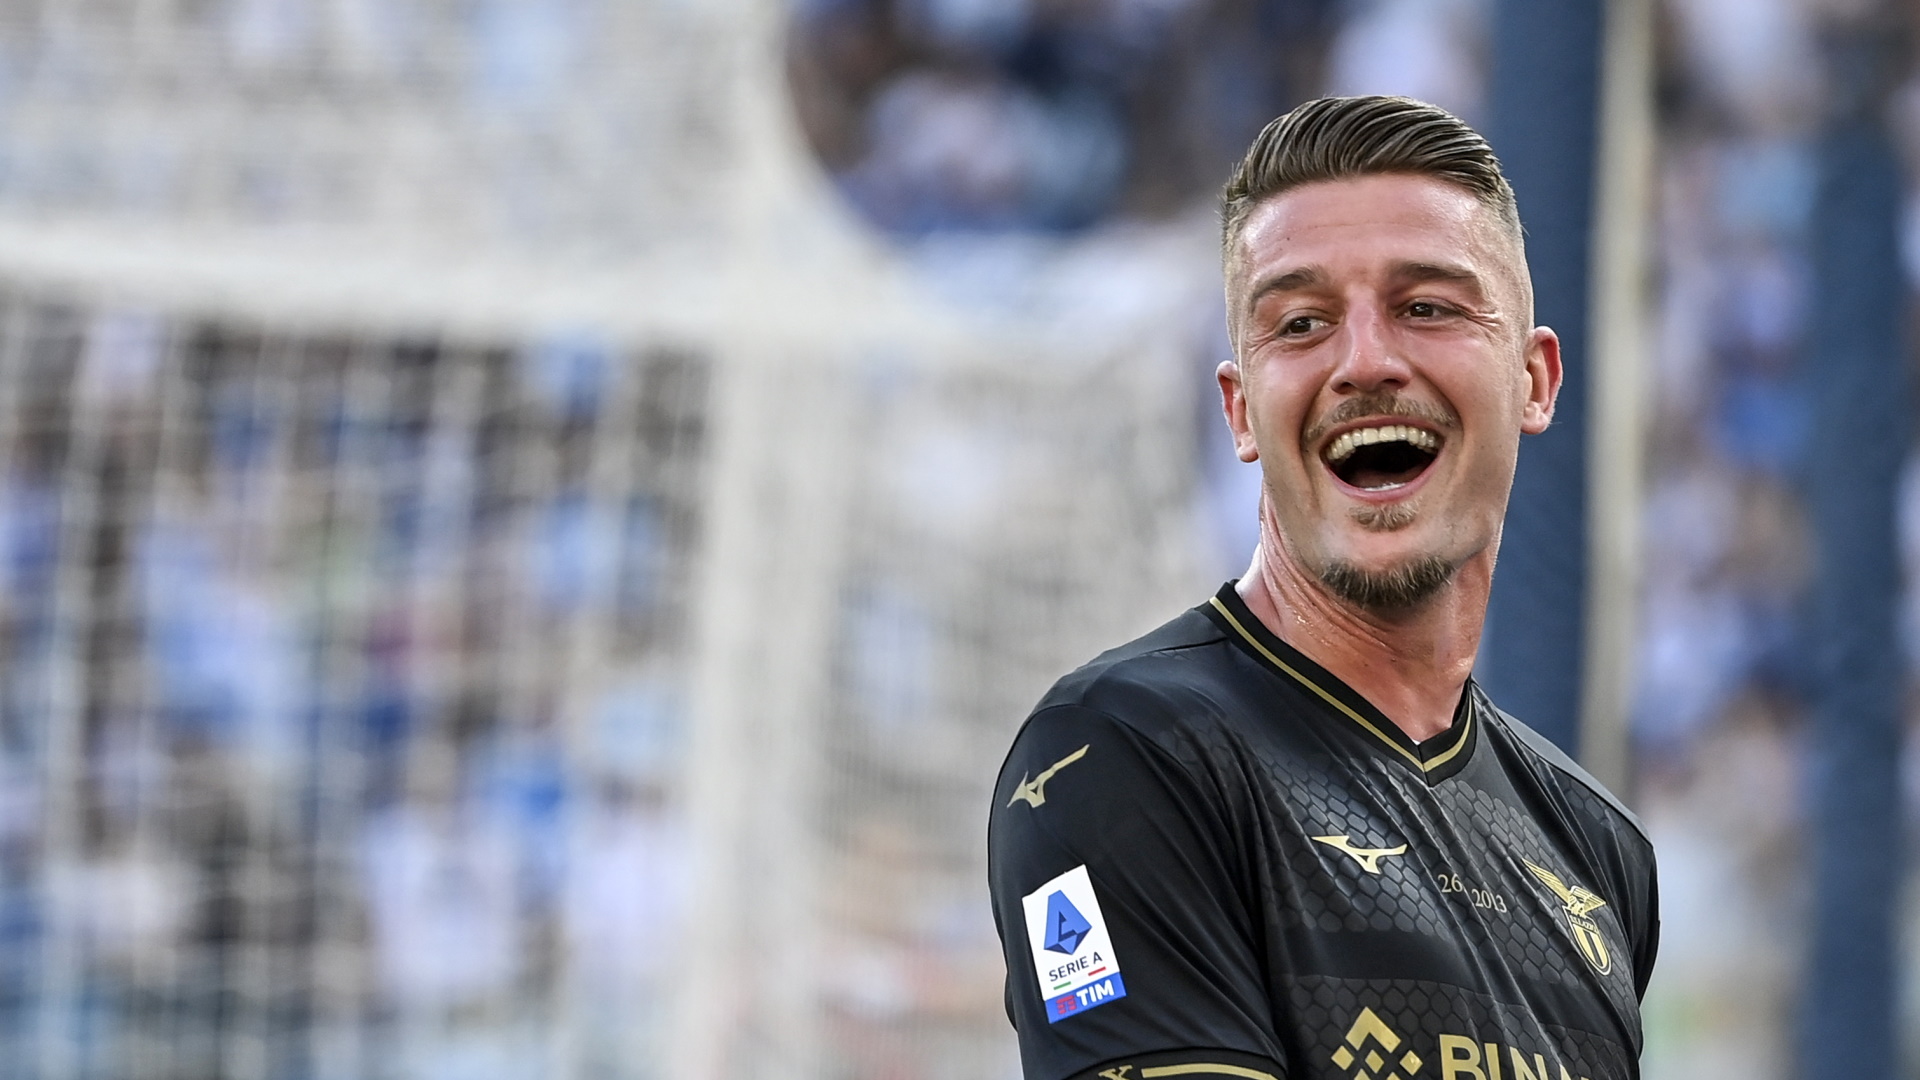 The incident of Lazio rejecting bids for Milinkovic-Savic can be tracked back to 2018, when Milan were interested to sign him, alongisde Juventus.